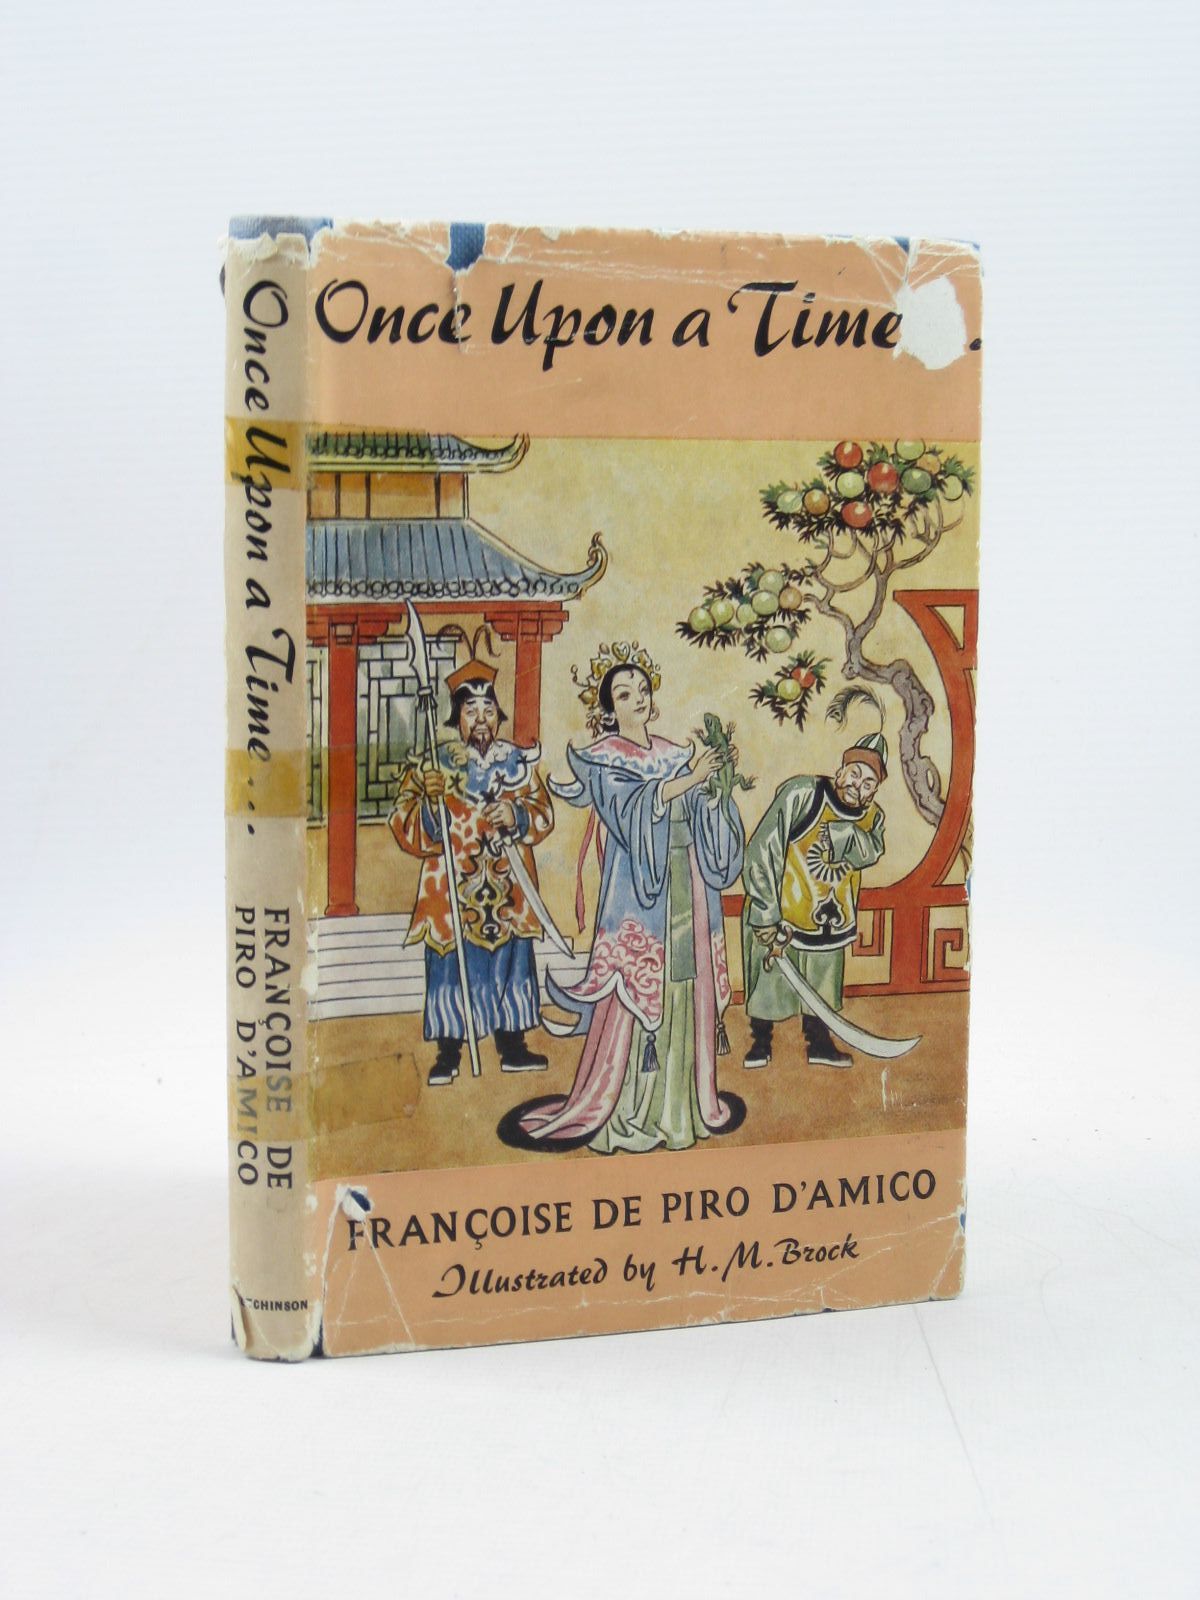 Cover of ONCE UPON A TIME by Francoise De Piro D'Amico